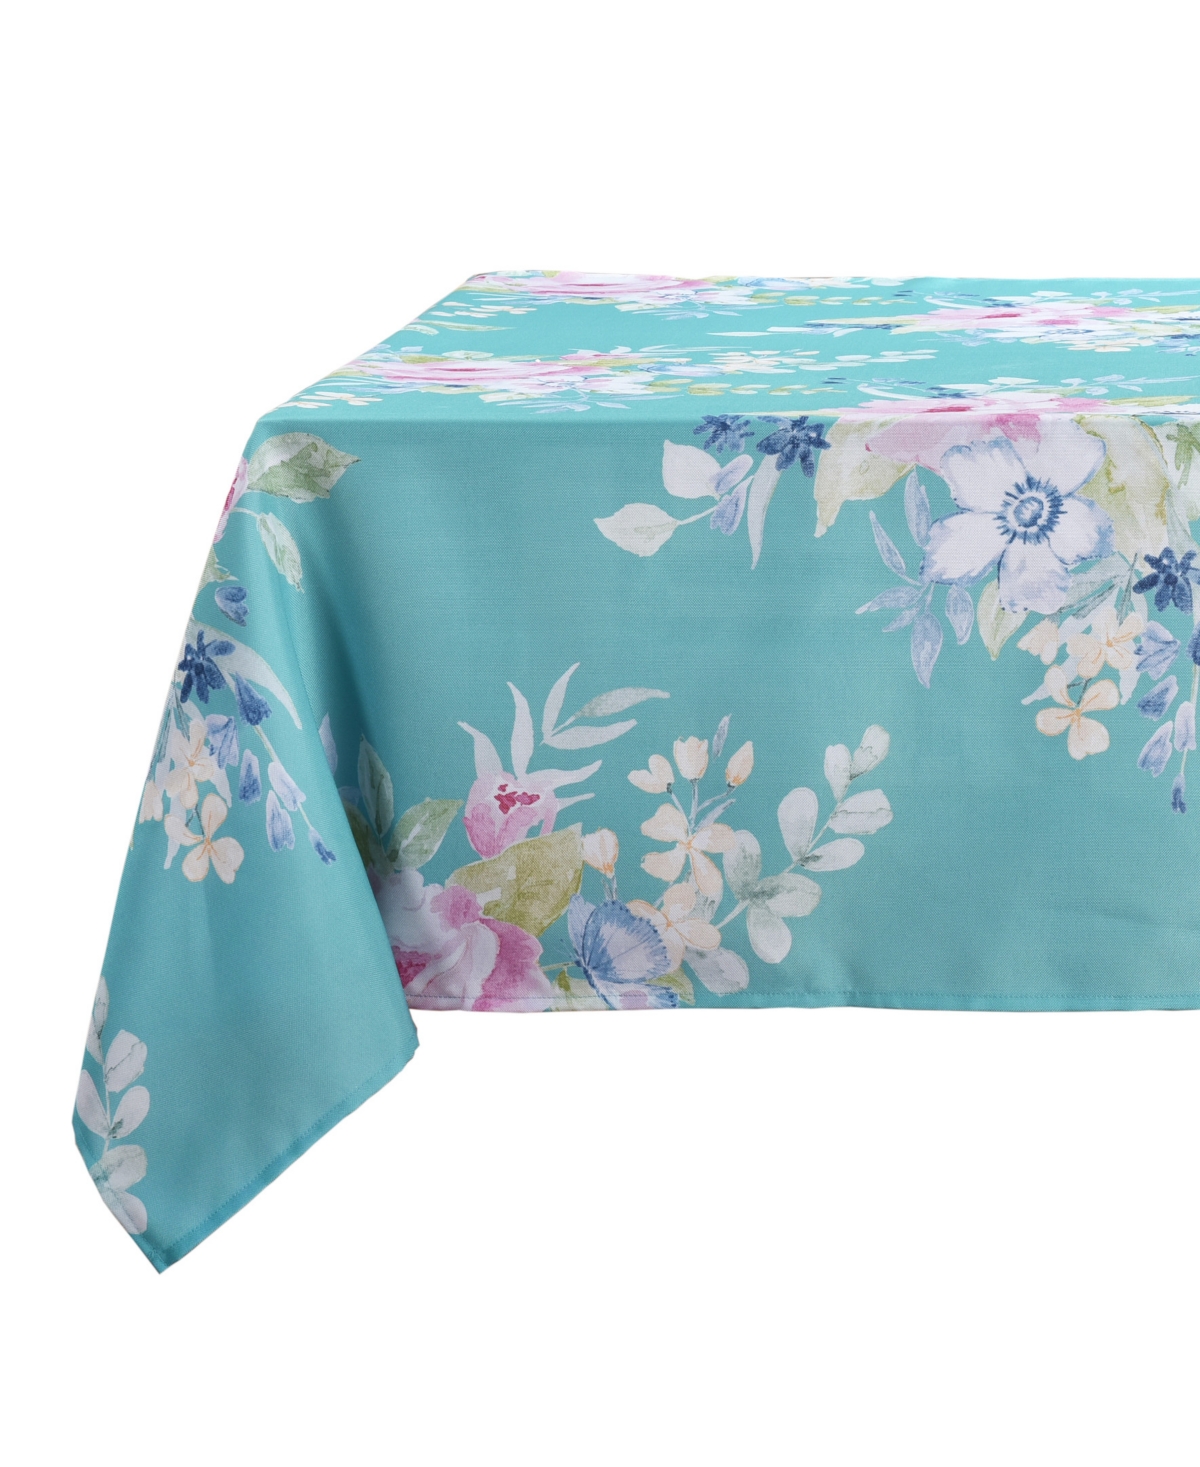 J Queen New York Esme Umbrella Tablecloth 52 X 52 In Turquoise